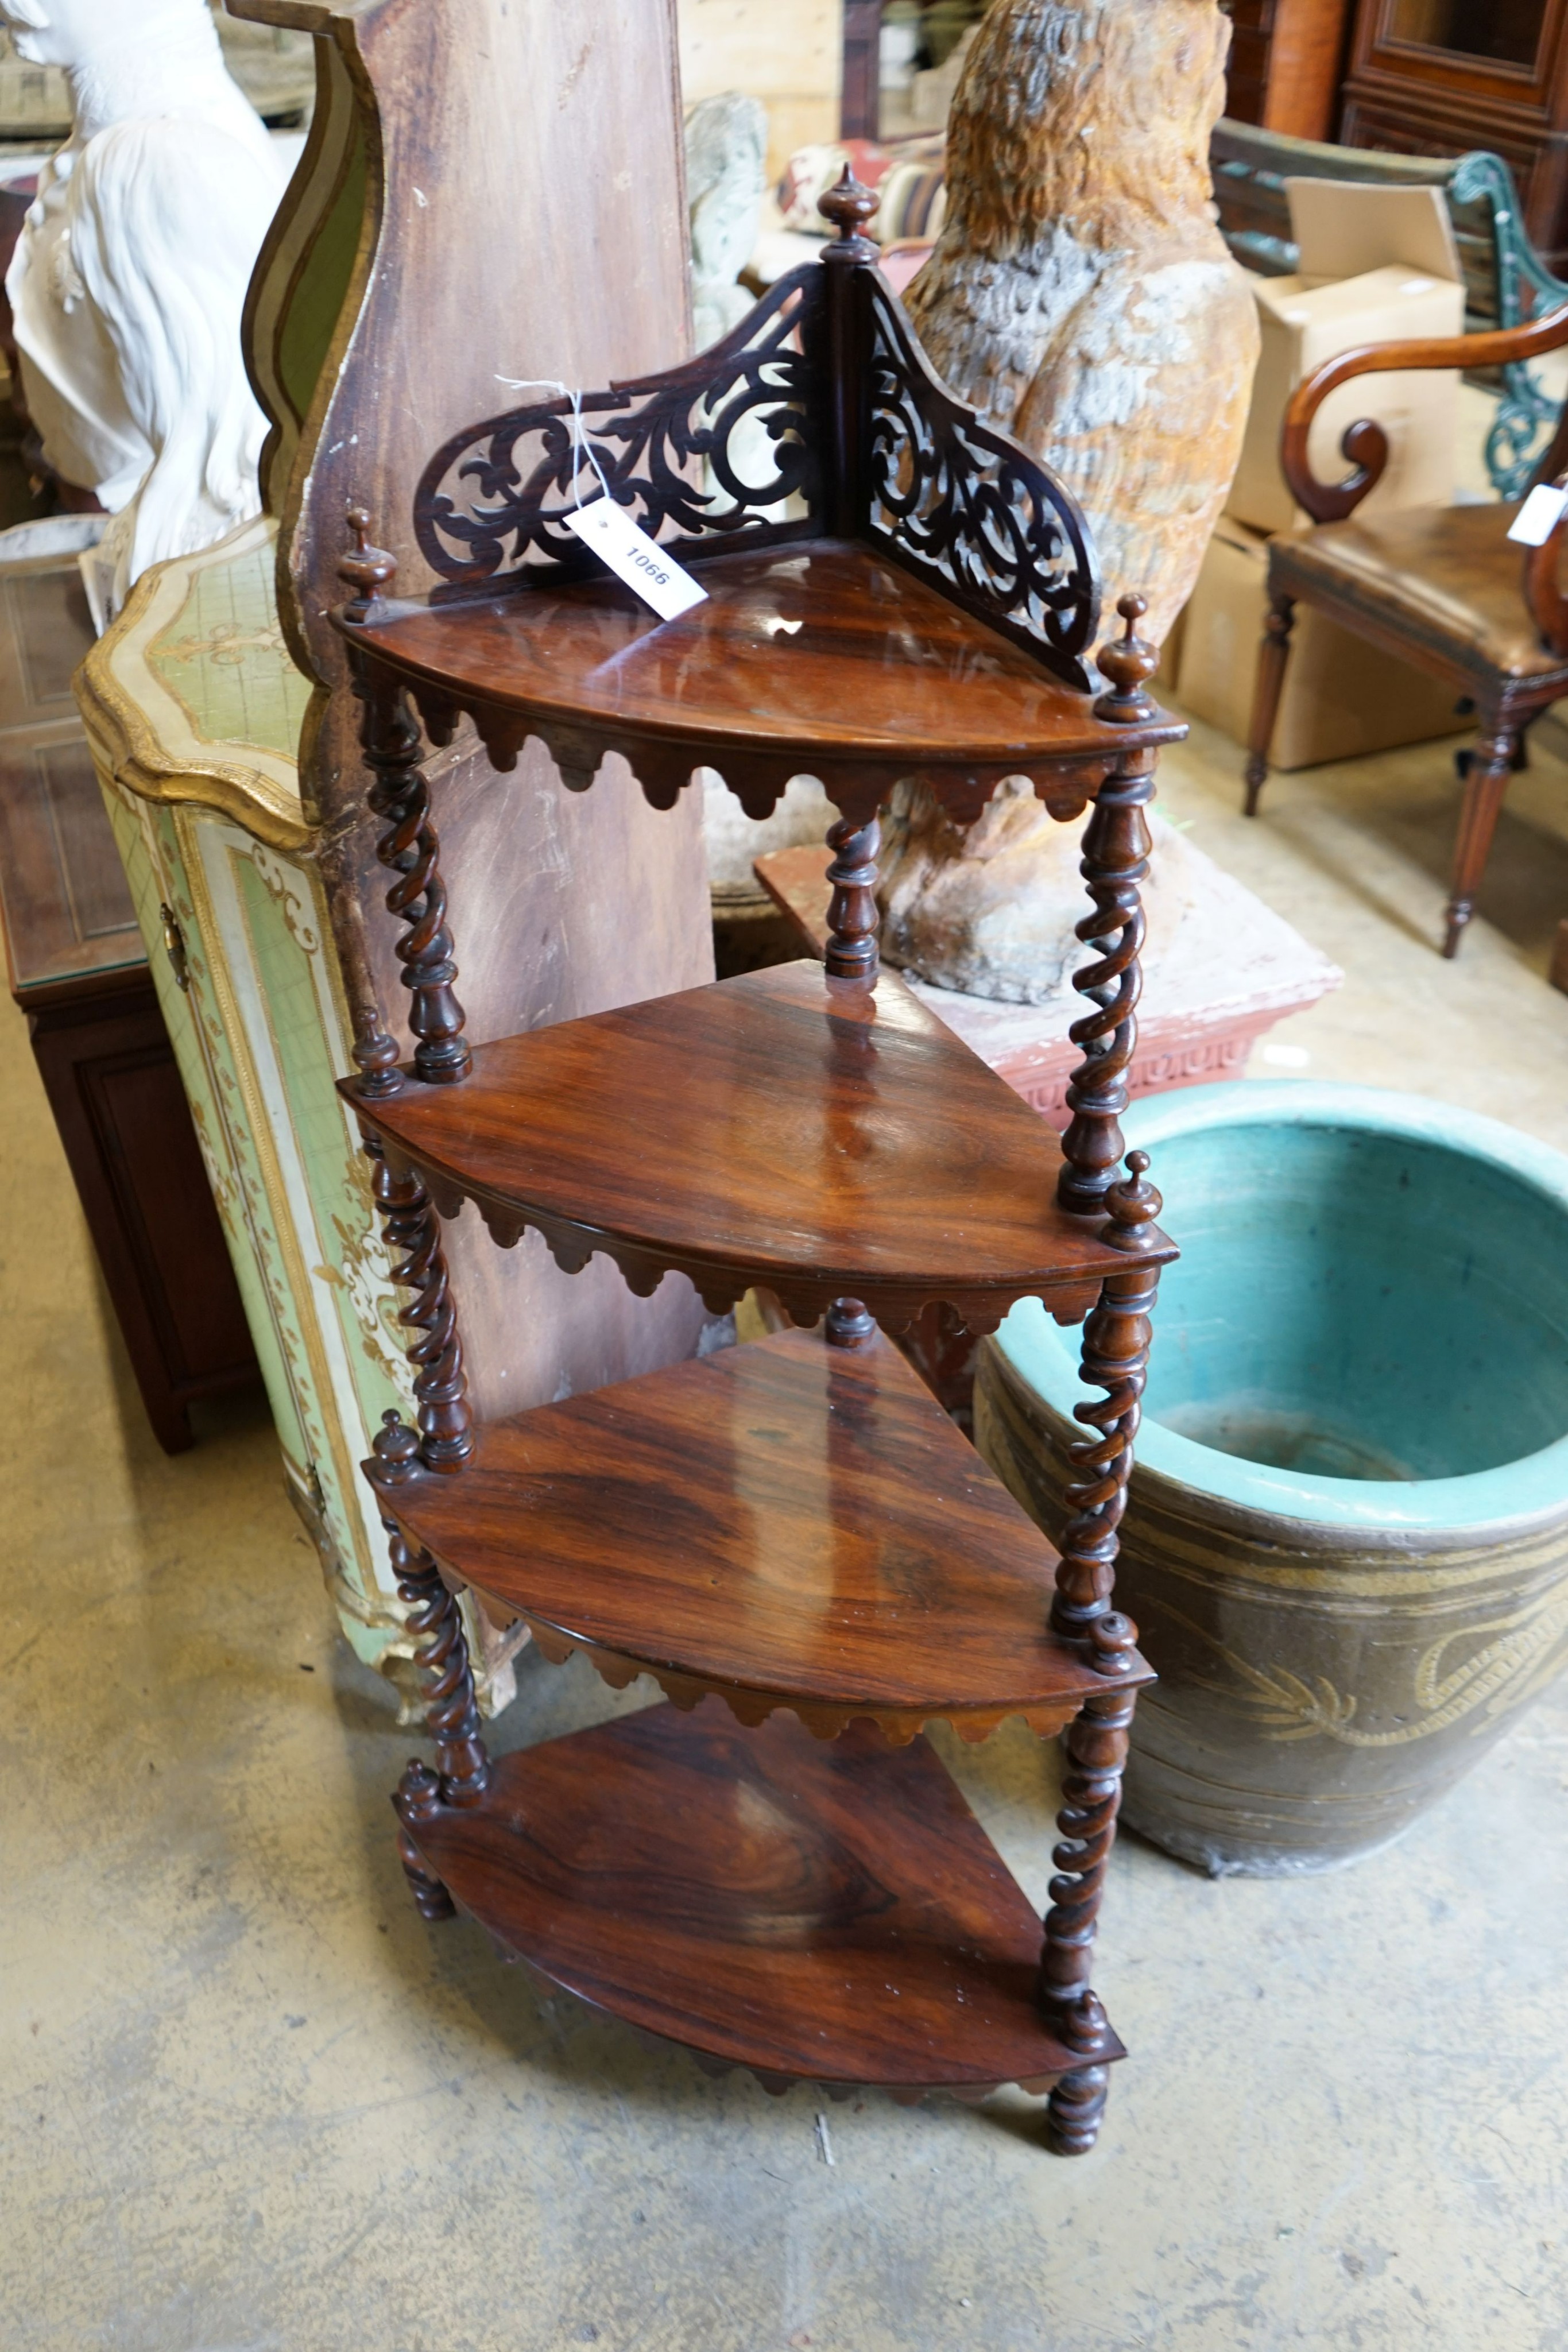 A Victorian rosewood bow front four tier corner whatnot, width 58cm, depth 36cm, height 122cm